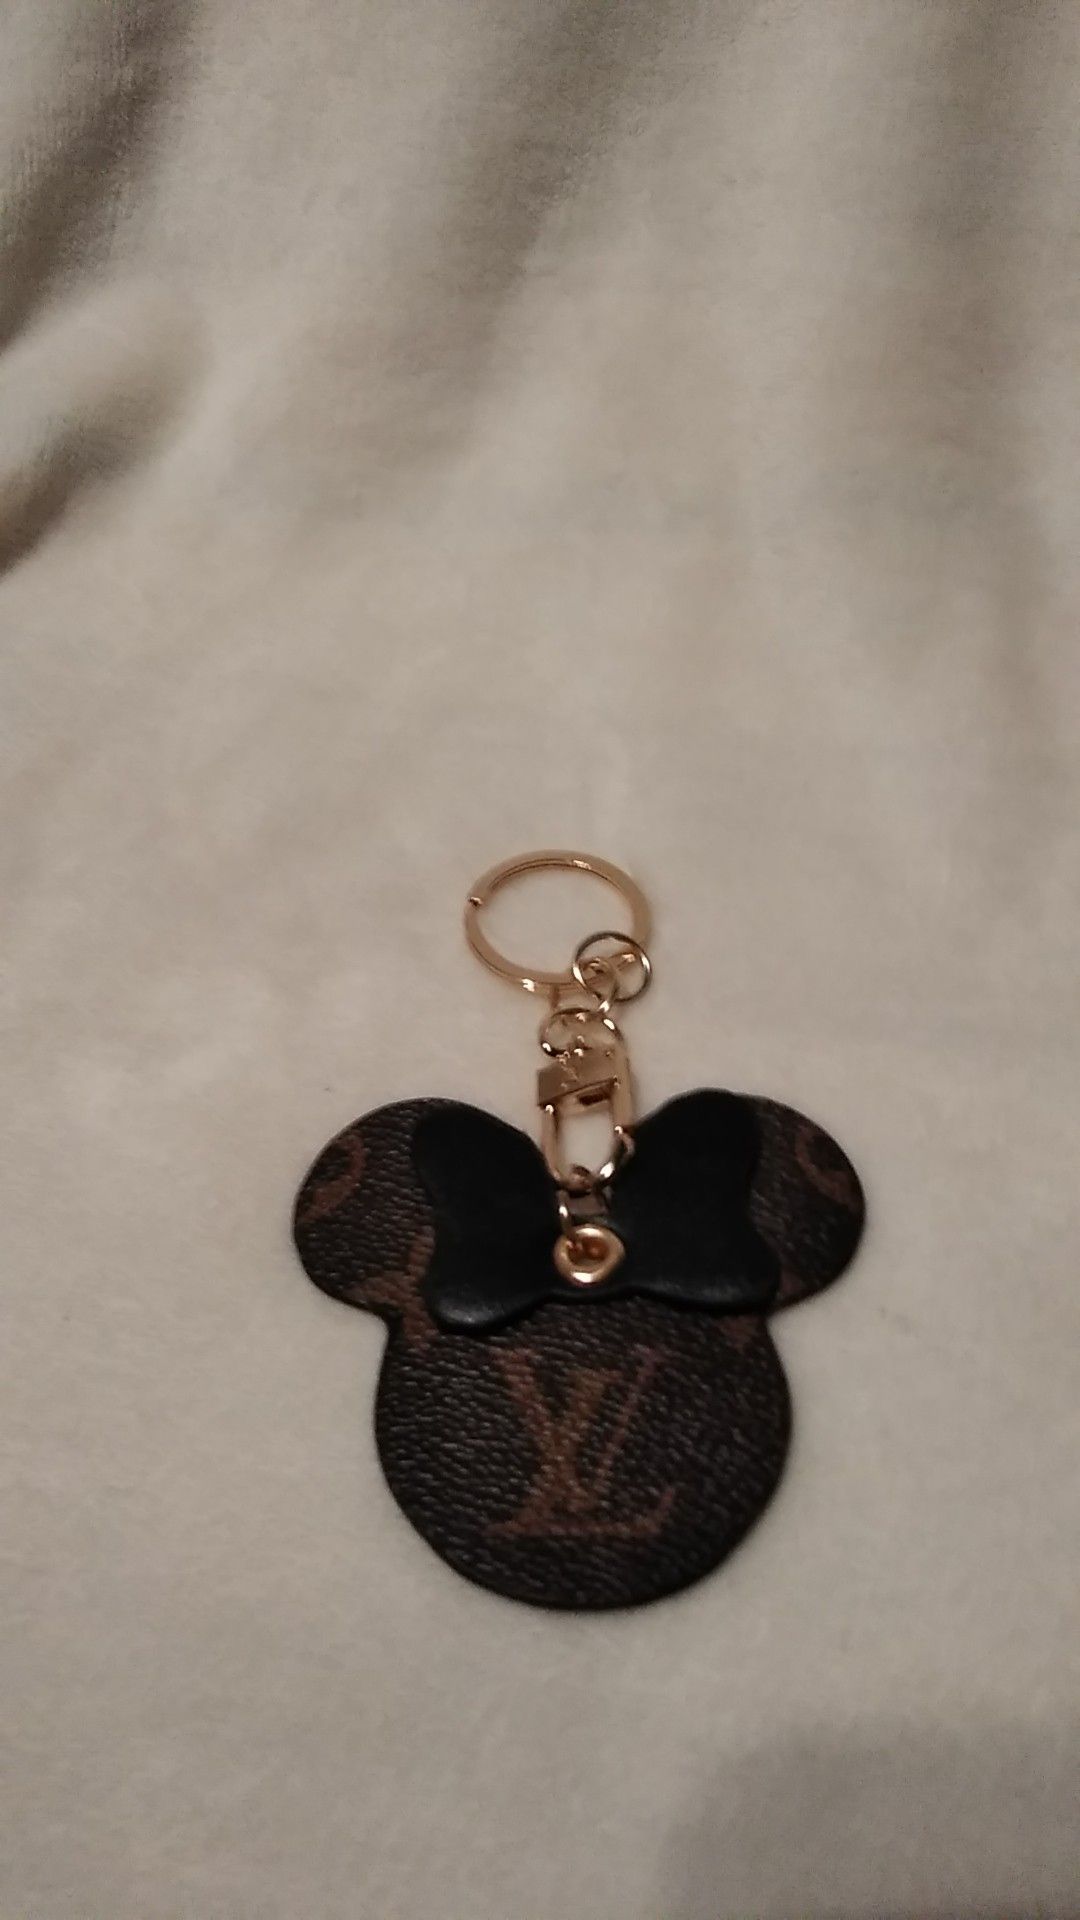 NEW PURSE CHARM OR KEY FOB WITH GIFT BOX AND DUST BAG